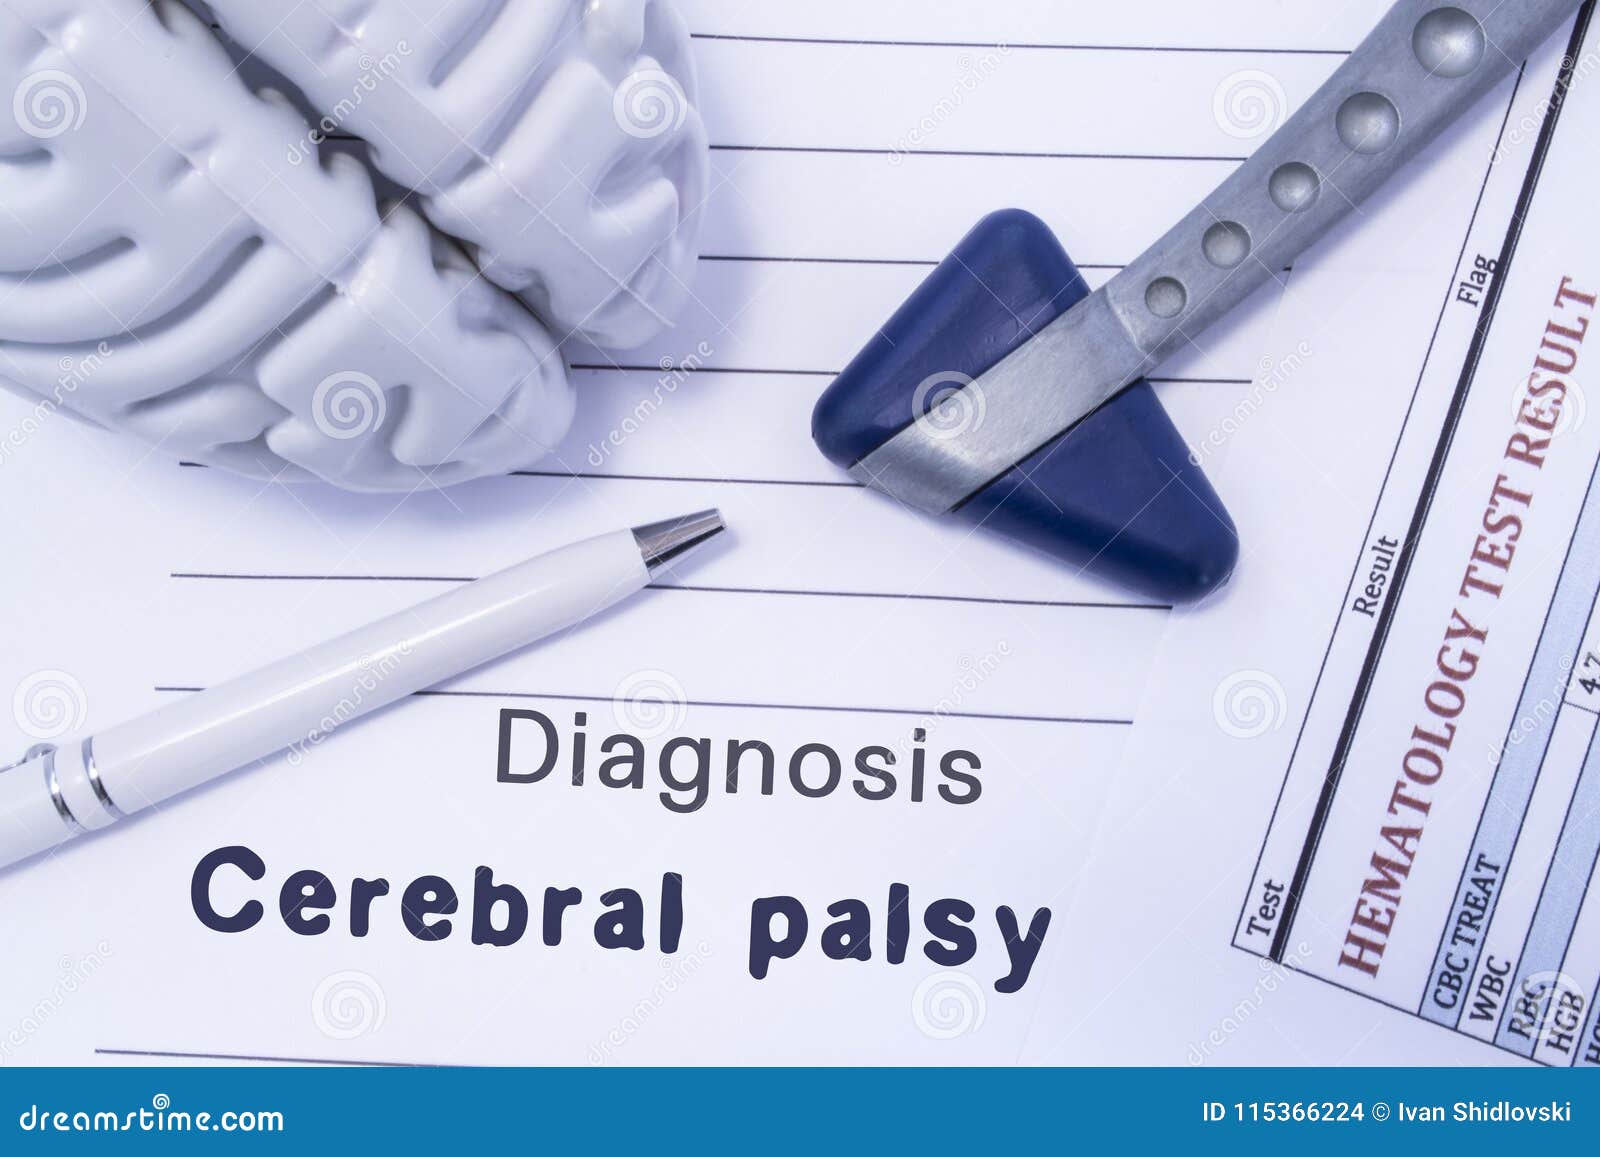 diagnosis cerebral palsy. figure brain, neurological hammer, printed on a paper blood test and written diagnosis of cerebral palsy